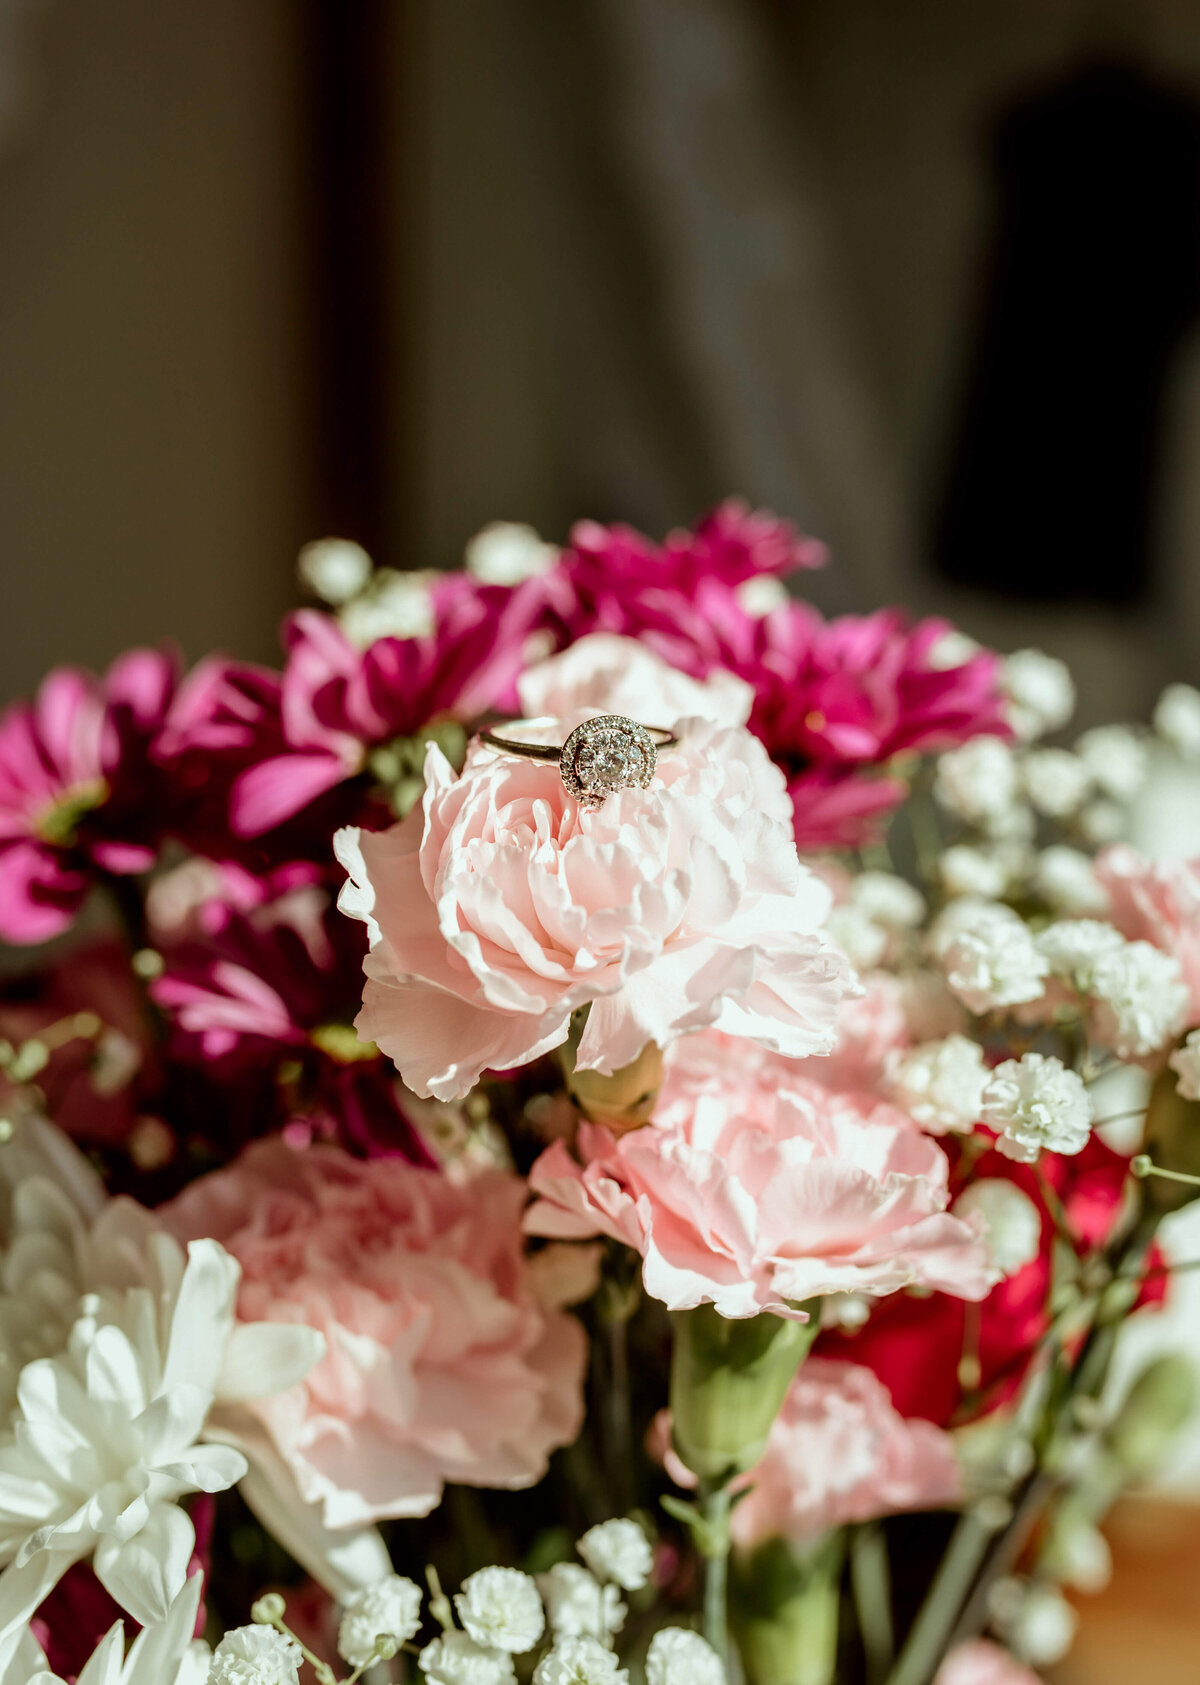 detail shot of wedding ring in floral arrangement for intimate elopement